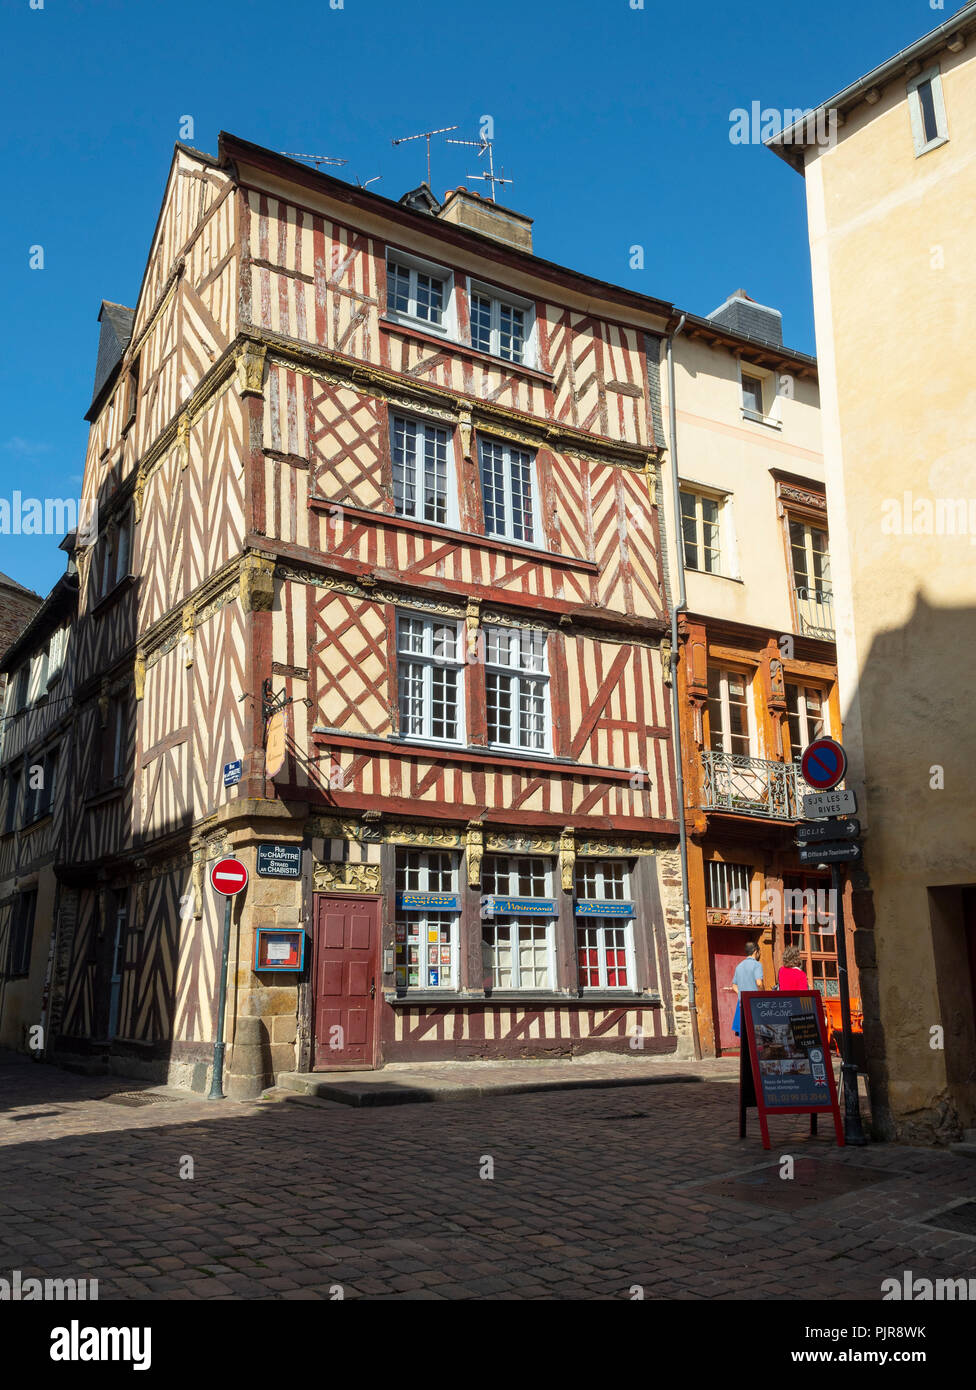 Half-timbered houses and cobbled streets, old Rennes, France. Stock Photo